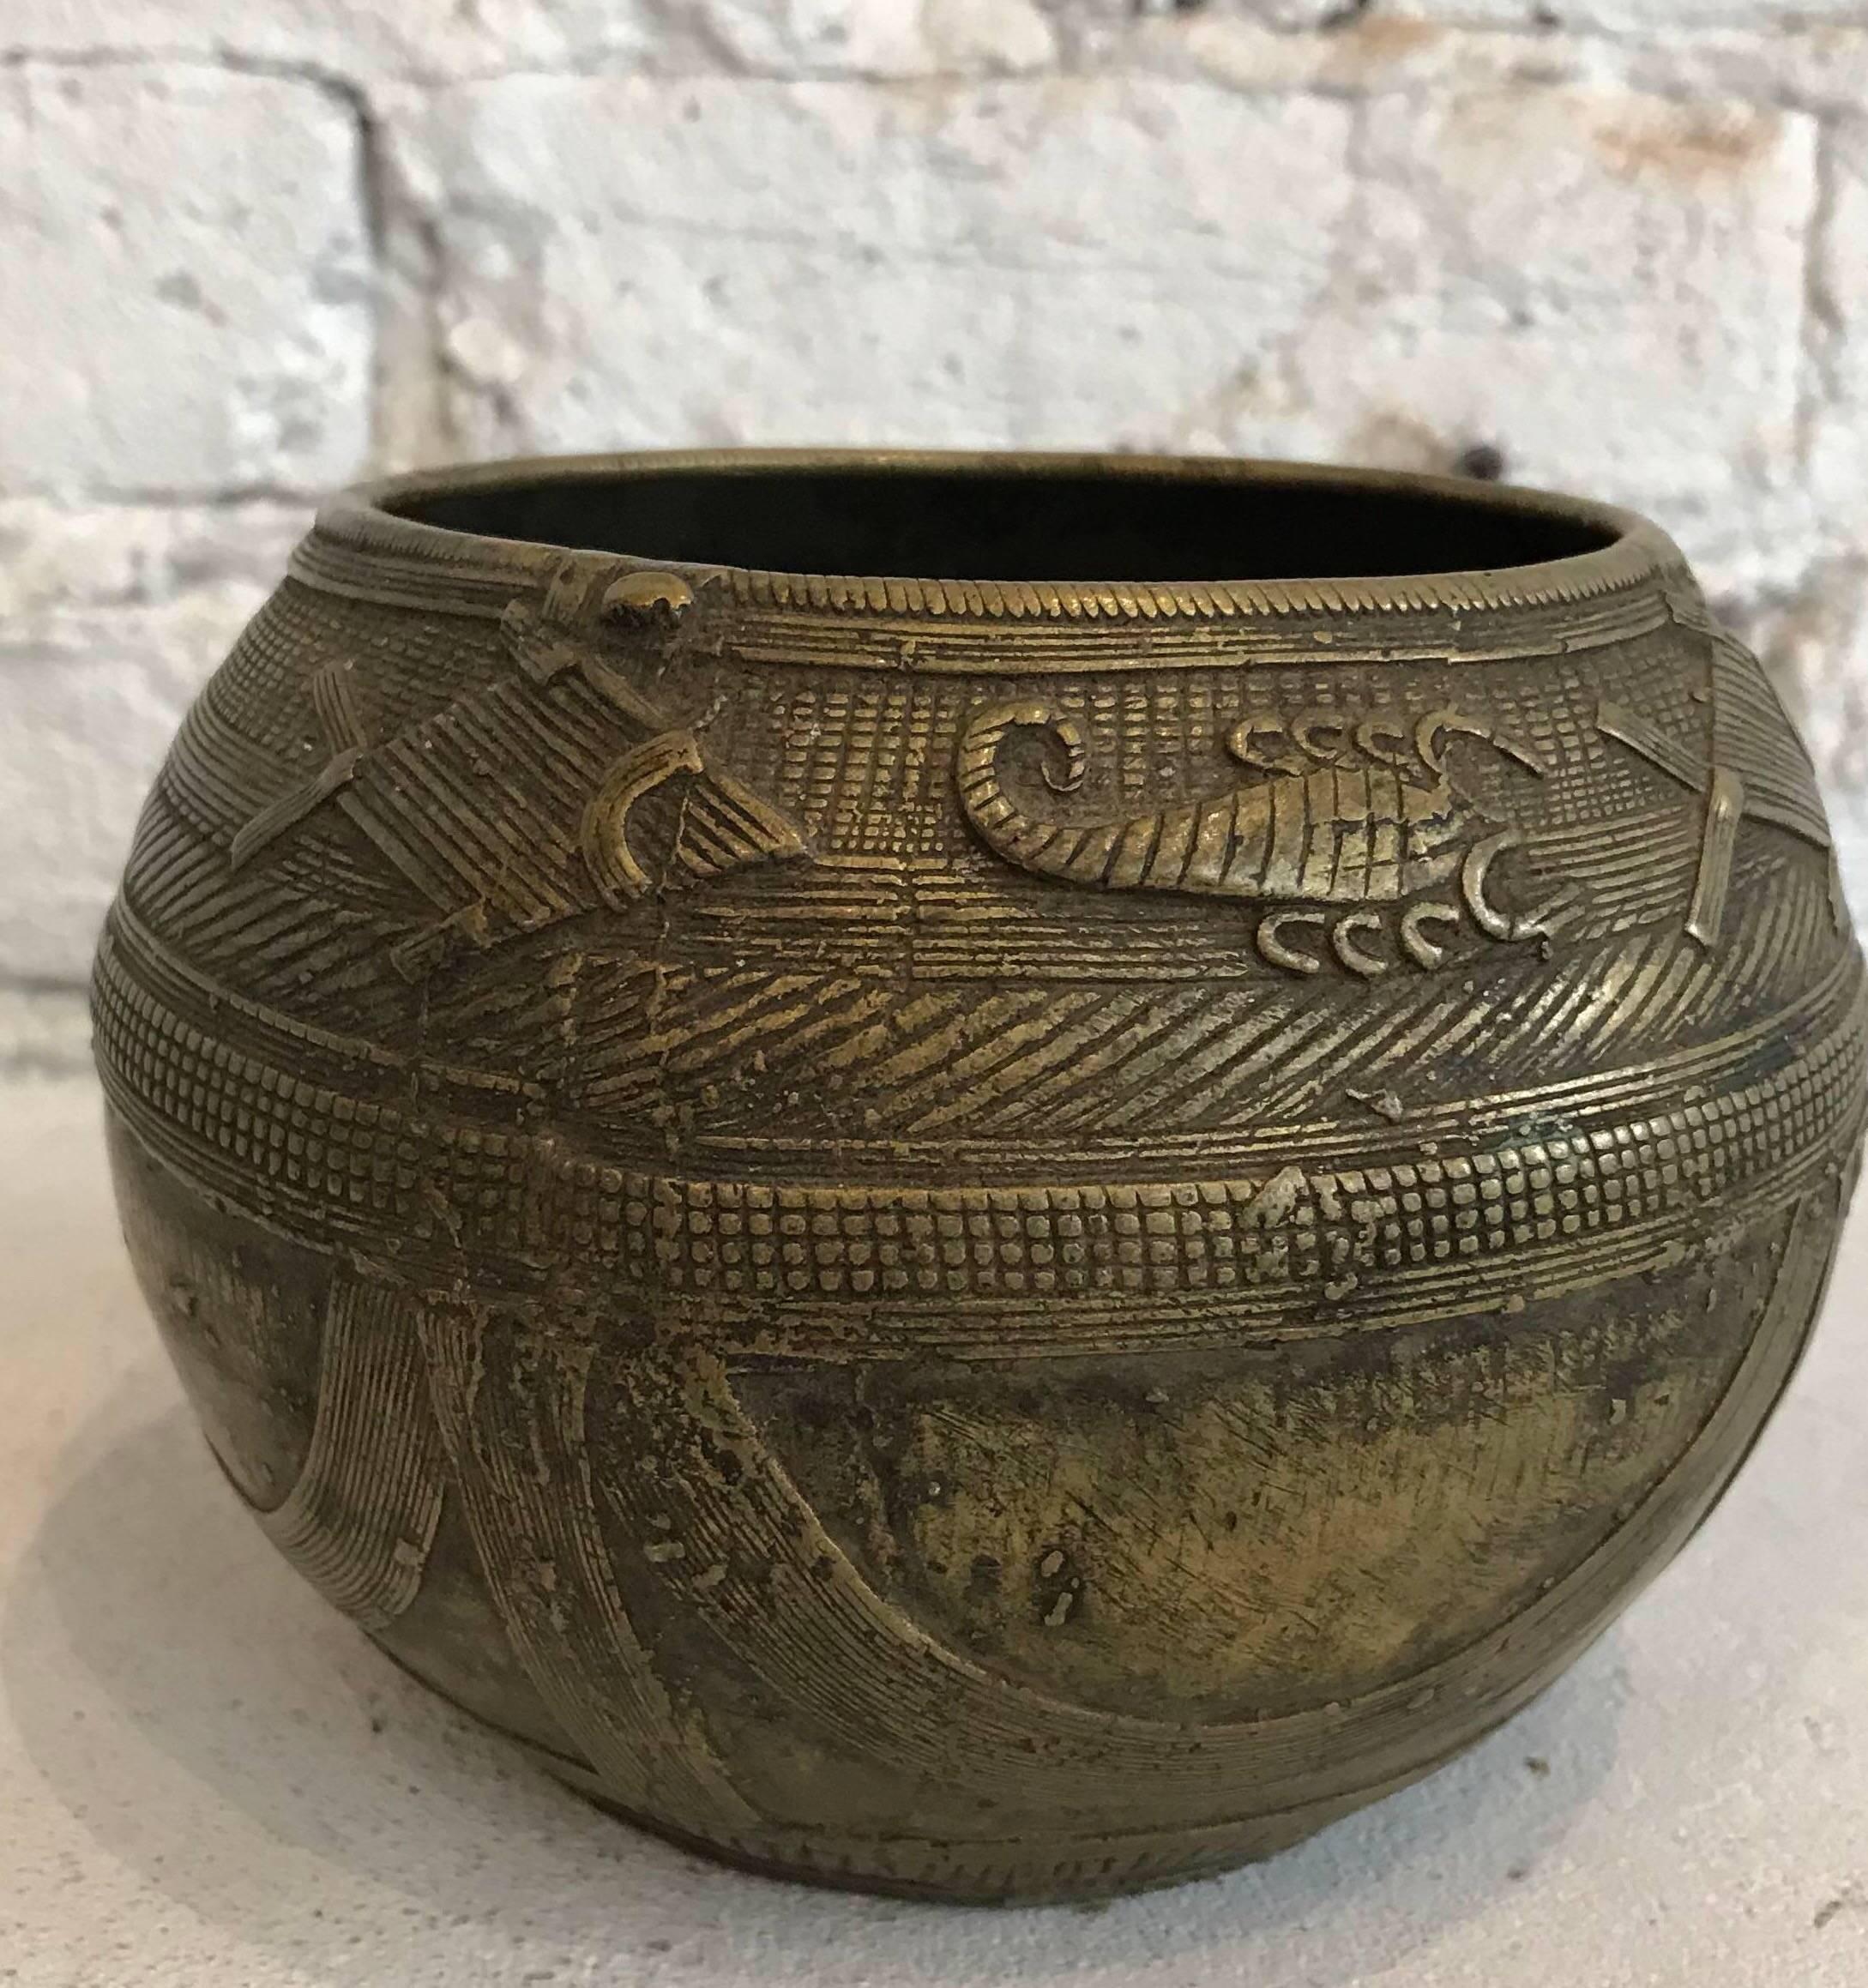 Early 20th century Dhorkra Measuring Bowl from Orissa, India



Measures: Bowl is 4 inches height x 5.5 inches diameter. The base is 3.25 inches diameter and the opening is 3.75 inches diameter.